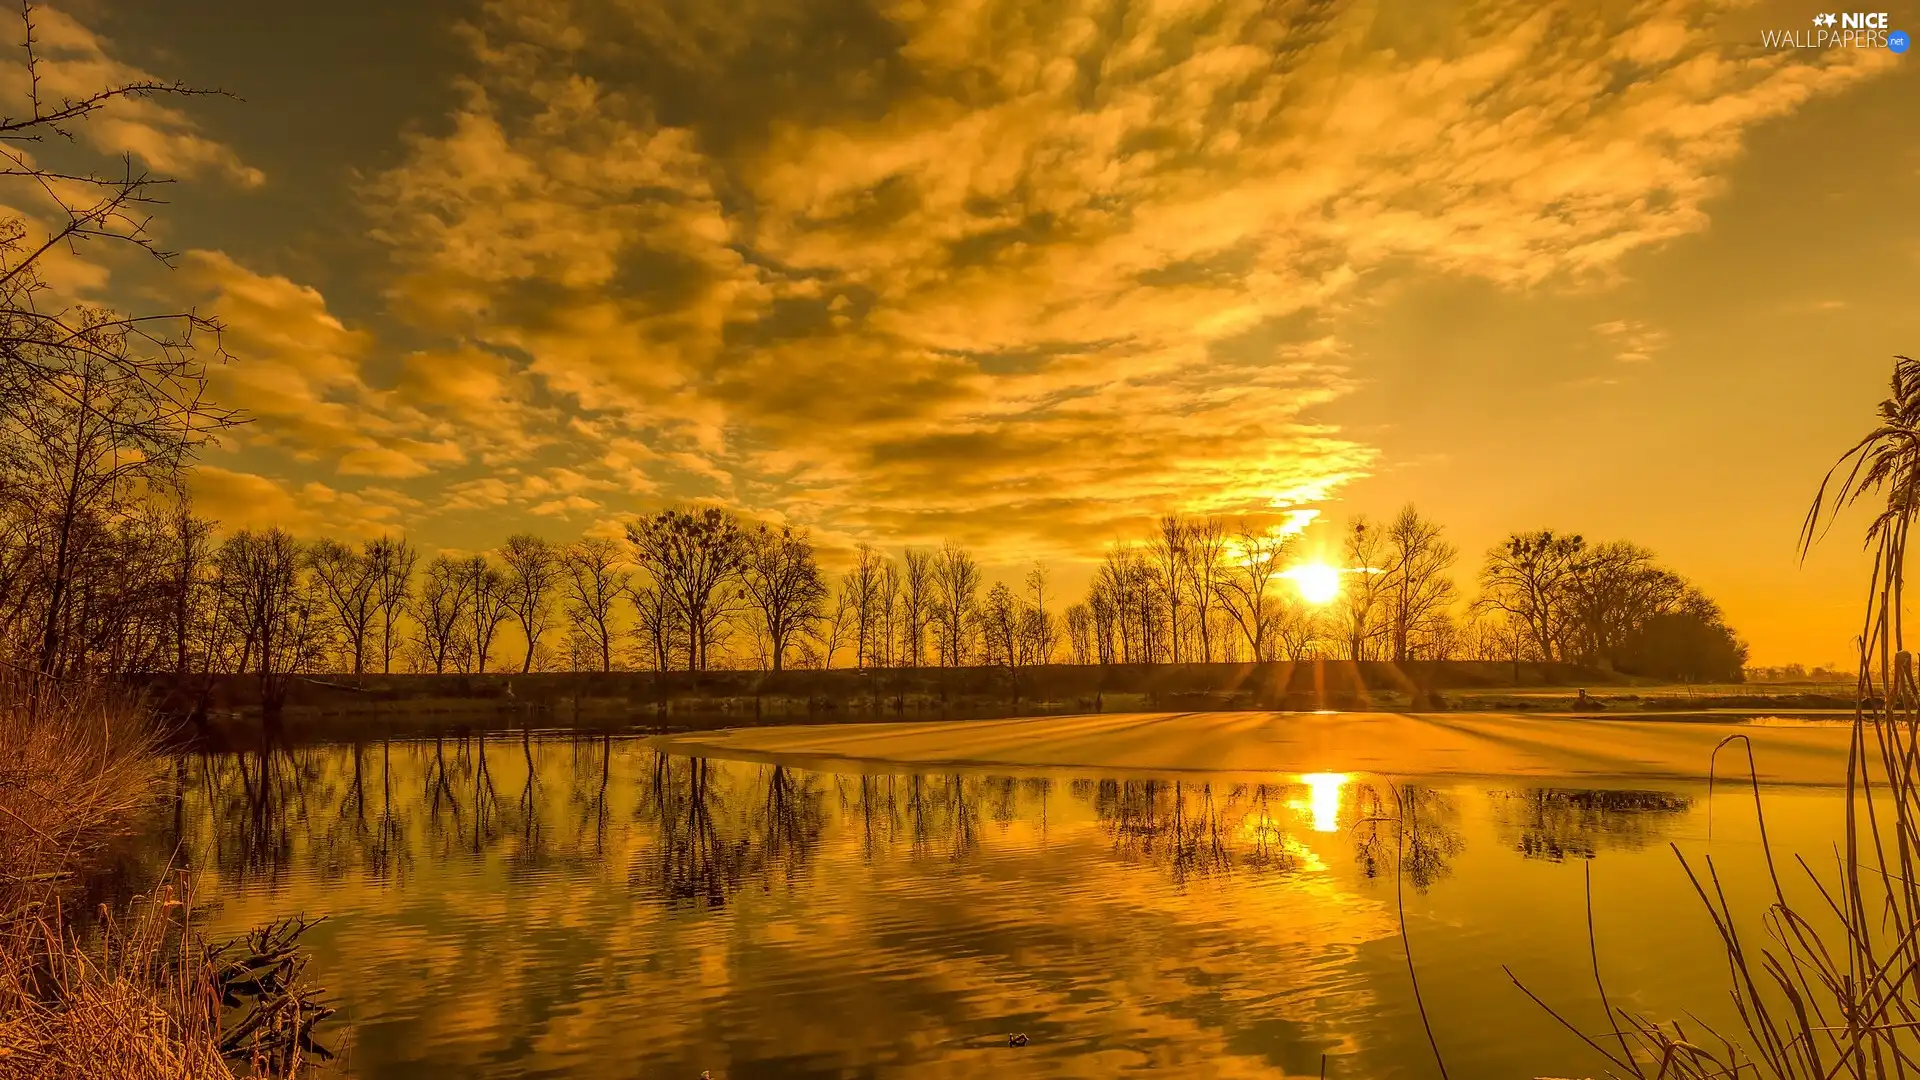 viewes, rays of the Sun, reflection, trees, winter, River, Sunrise